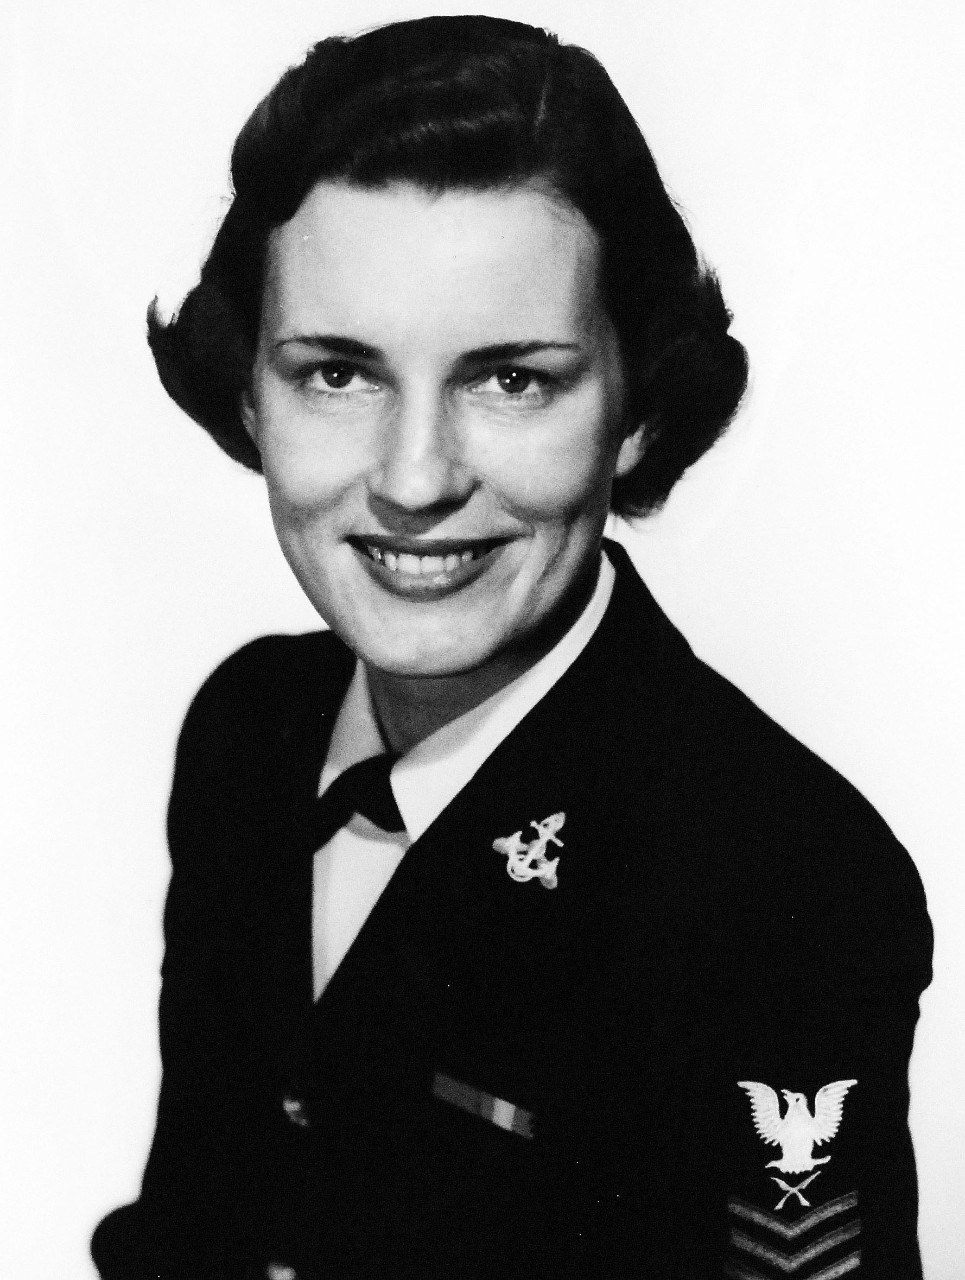 USN 709137:   Yeoman First Class Joan G. Mackie, March 1954.  One of the first two U.S. Navy enlisted WAVES to be selected for Officer Candidate School, March 1954.    Mackie will report to the school at Newport, Rhode Island in July.   Yeoman Mackie enlisted in the U.S. Navy in 1949 and since that time has served in Hawaii and France, as well as U.S. Bases.  In 1952, she became the first WAVE to be assigned to duty on the Staff of Supreme Allied Commander, Atlantic.  At the time of the photograph, Yeoman Mackie was on duty with the Bureau of Naval Personnel, Washington, D.C.   Photograph released March 15, 1954.  Official U.S. Navy photograph, now in the collections of the National Archives.   